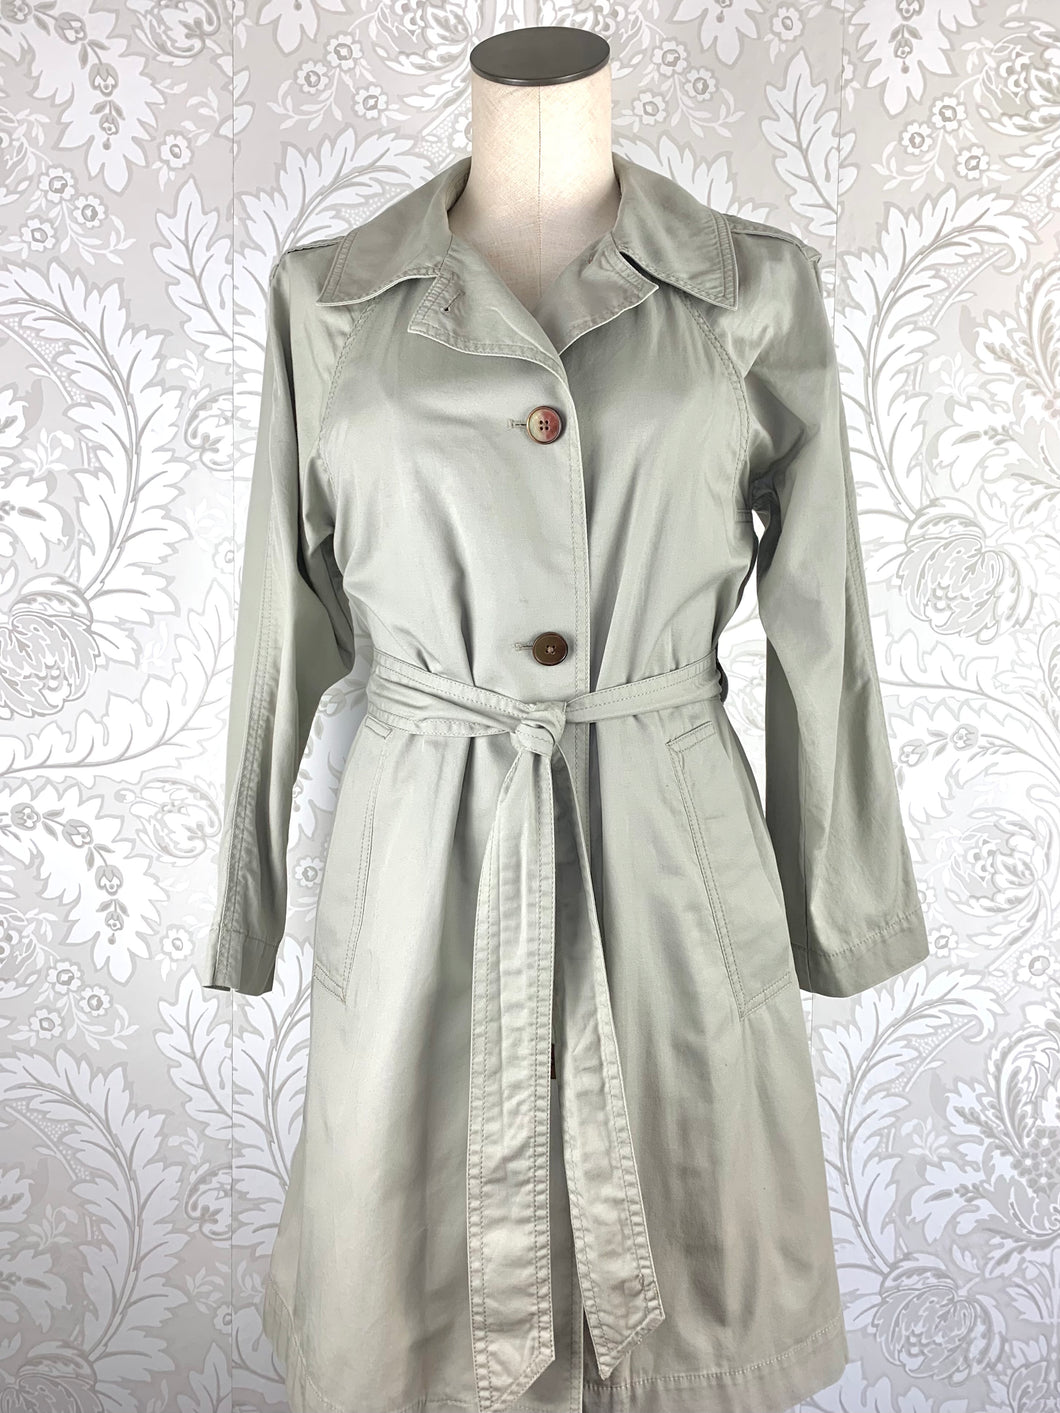 Marc by Marc Jacobs Trench Coat size XS